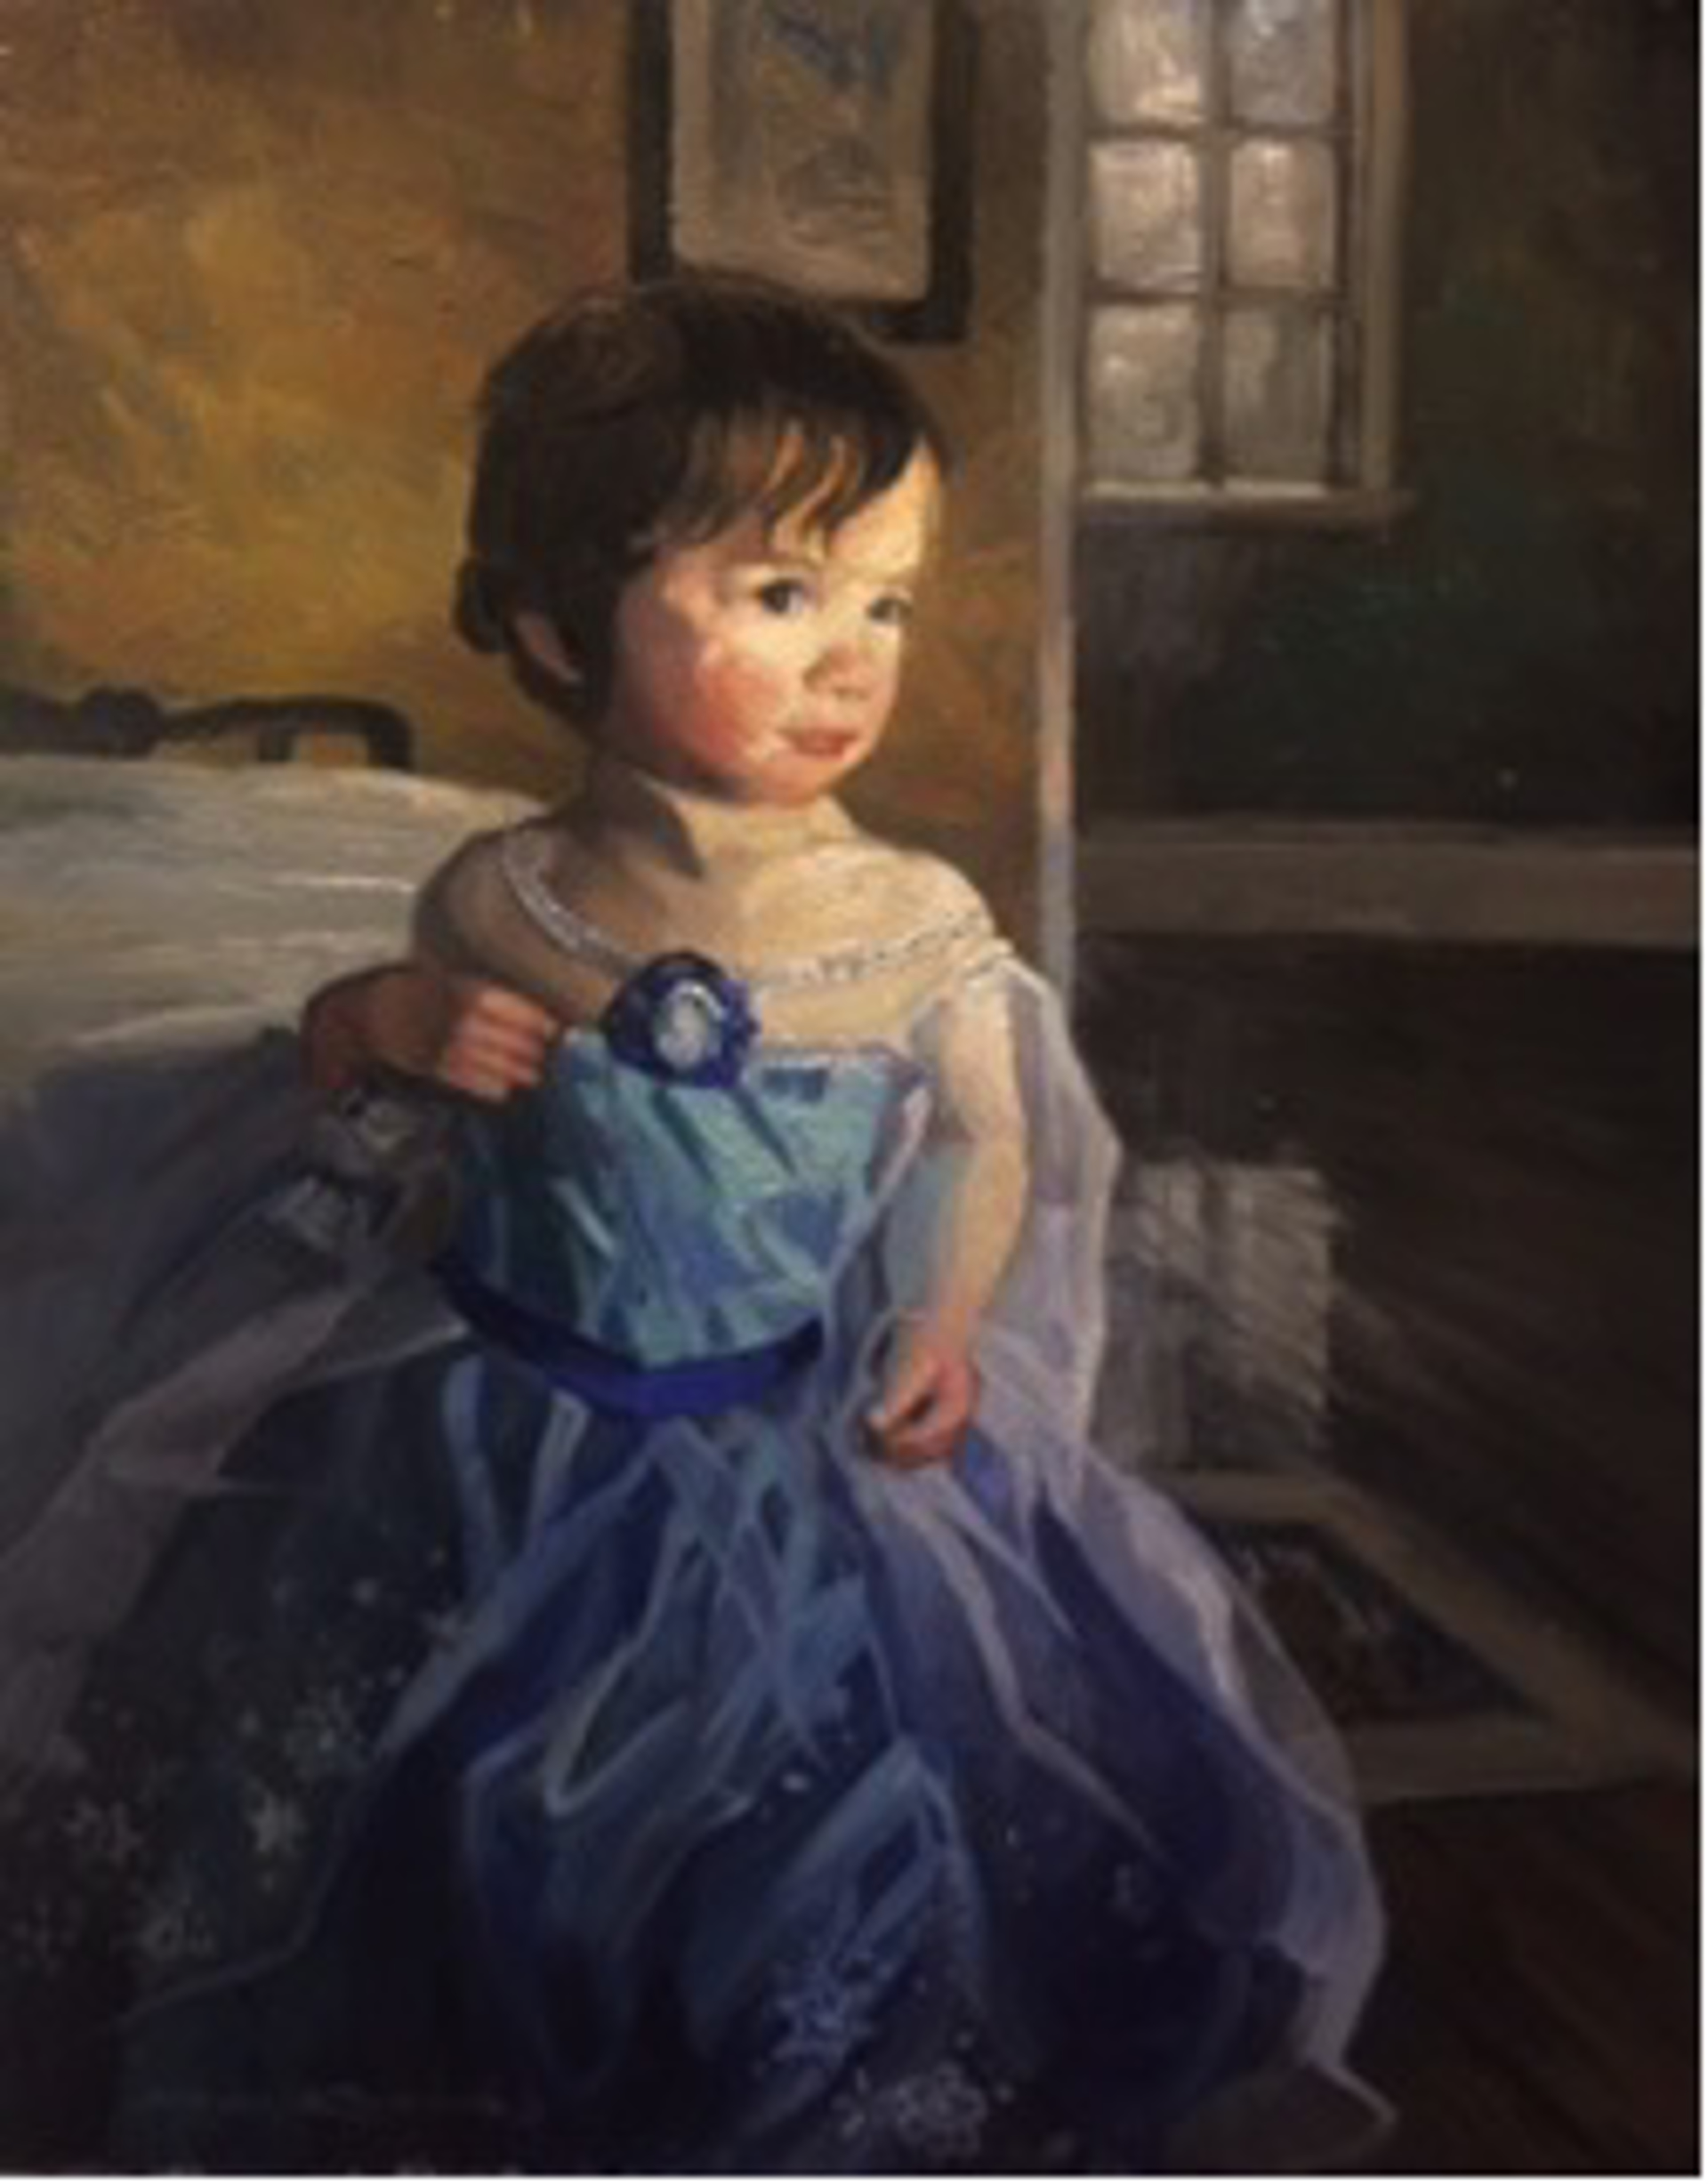 Olivia in the Blue Princess Dress by Ken Knowles